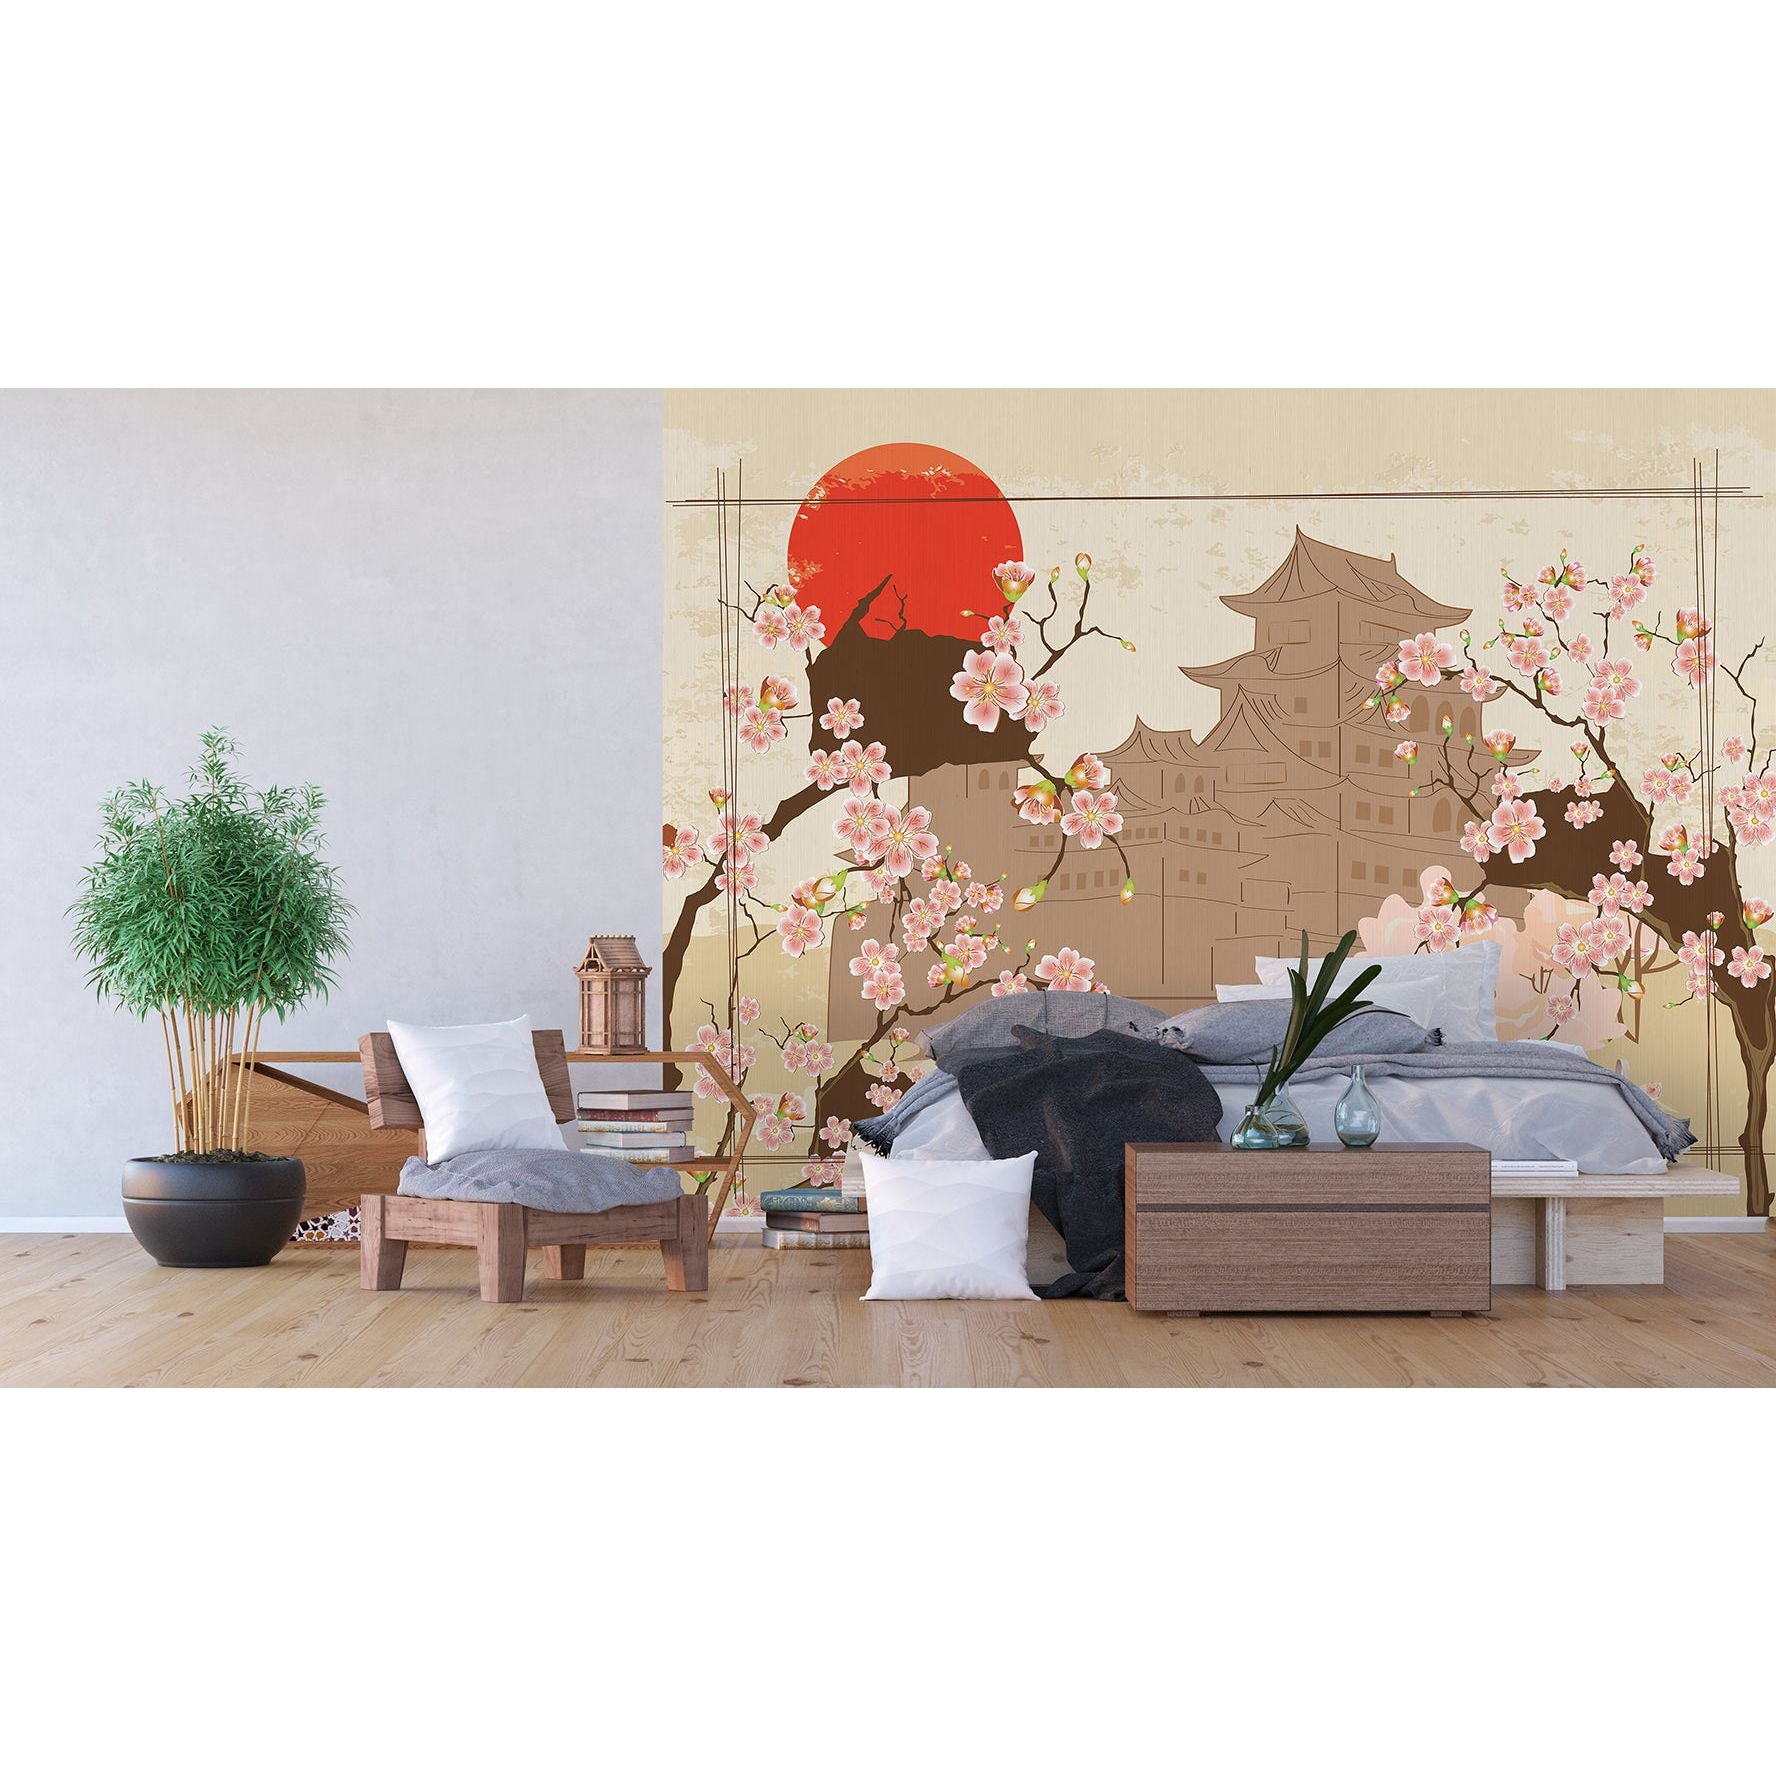 Eastern Blossom: Cherry Blossoms and Pagoda Wall Mural